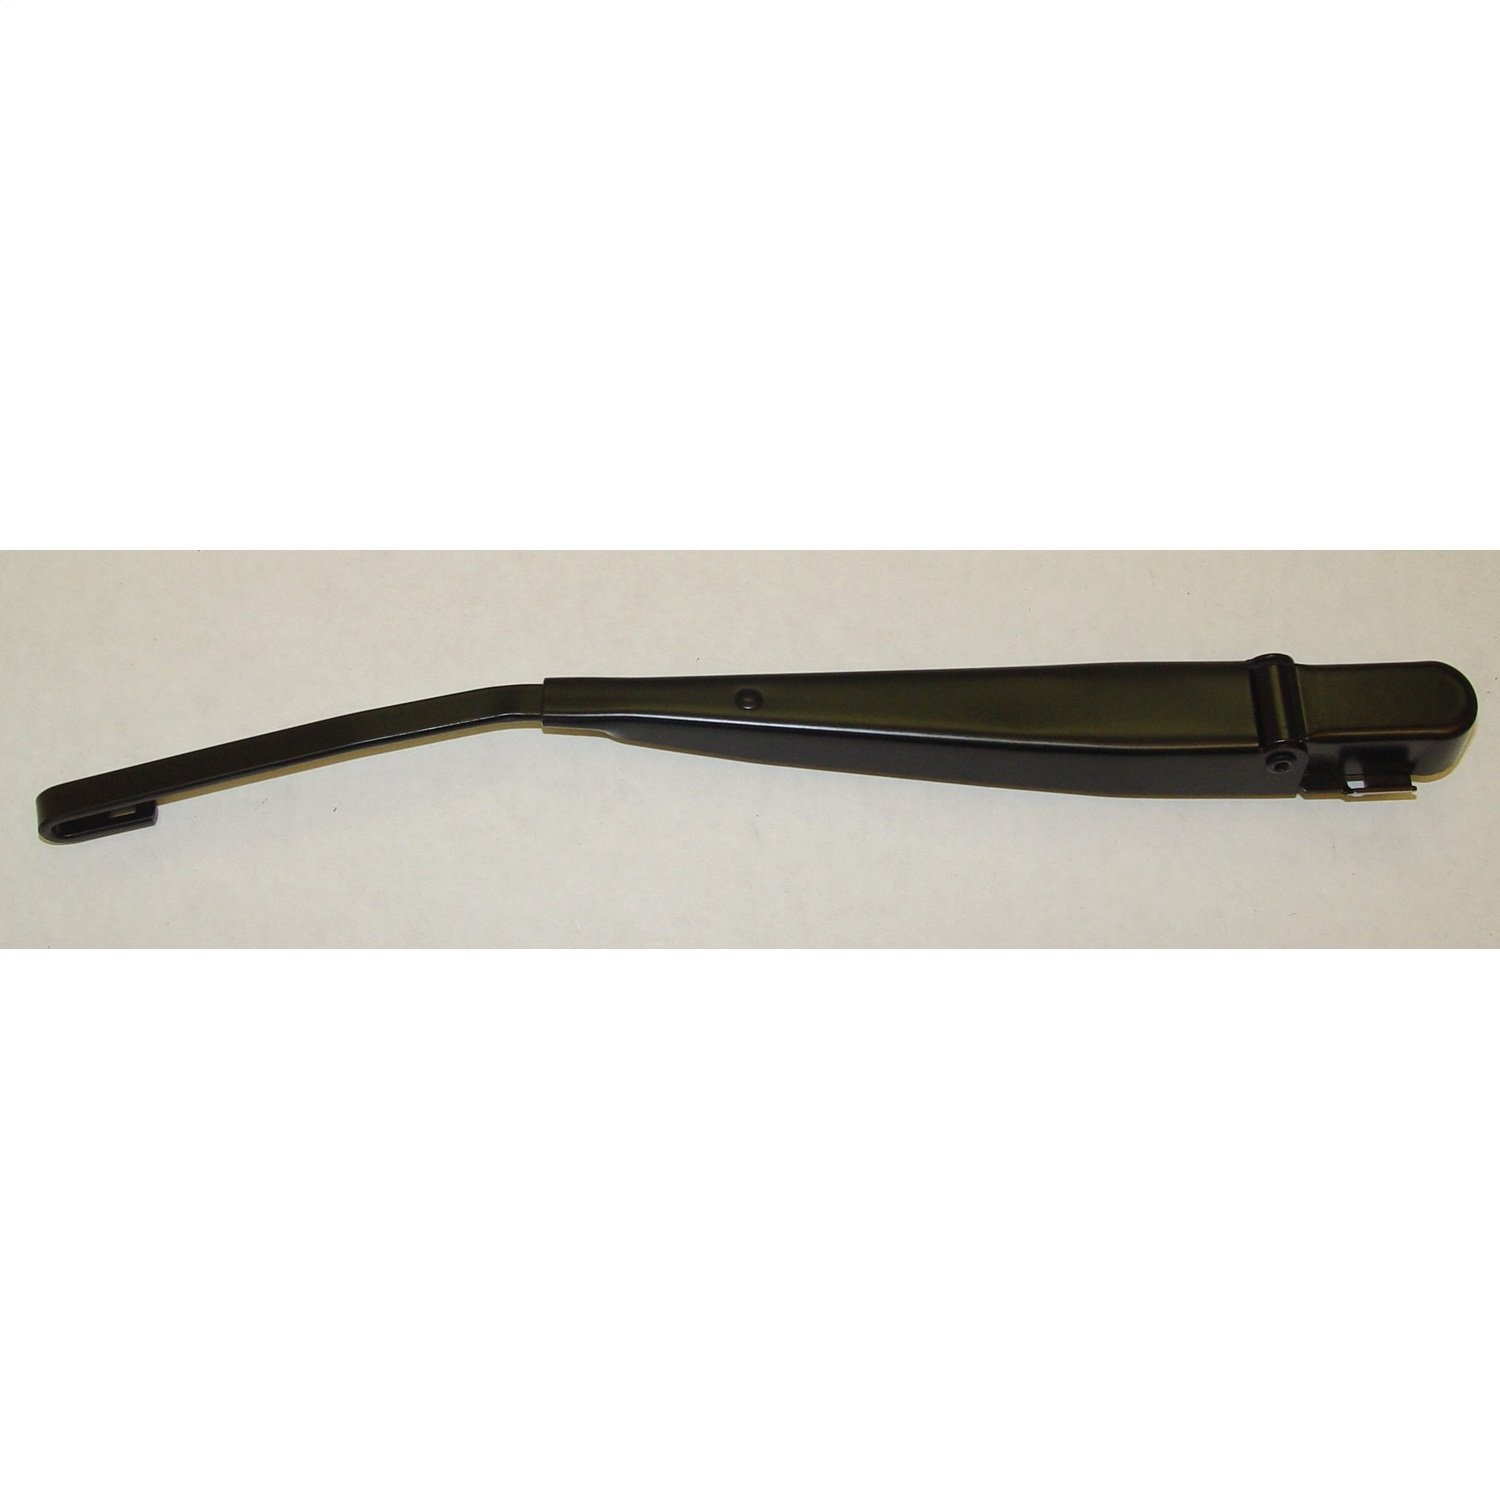 Replacement rear windshield wiper arm from Omix-ADA, Fits 97-02 Jeep Wrangler TJ